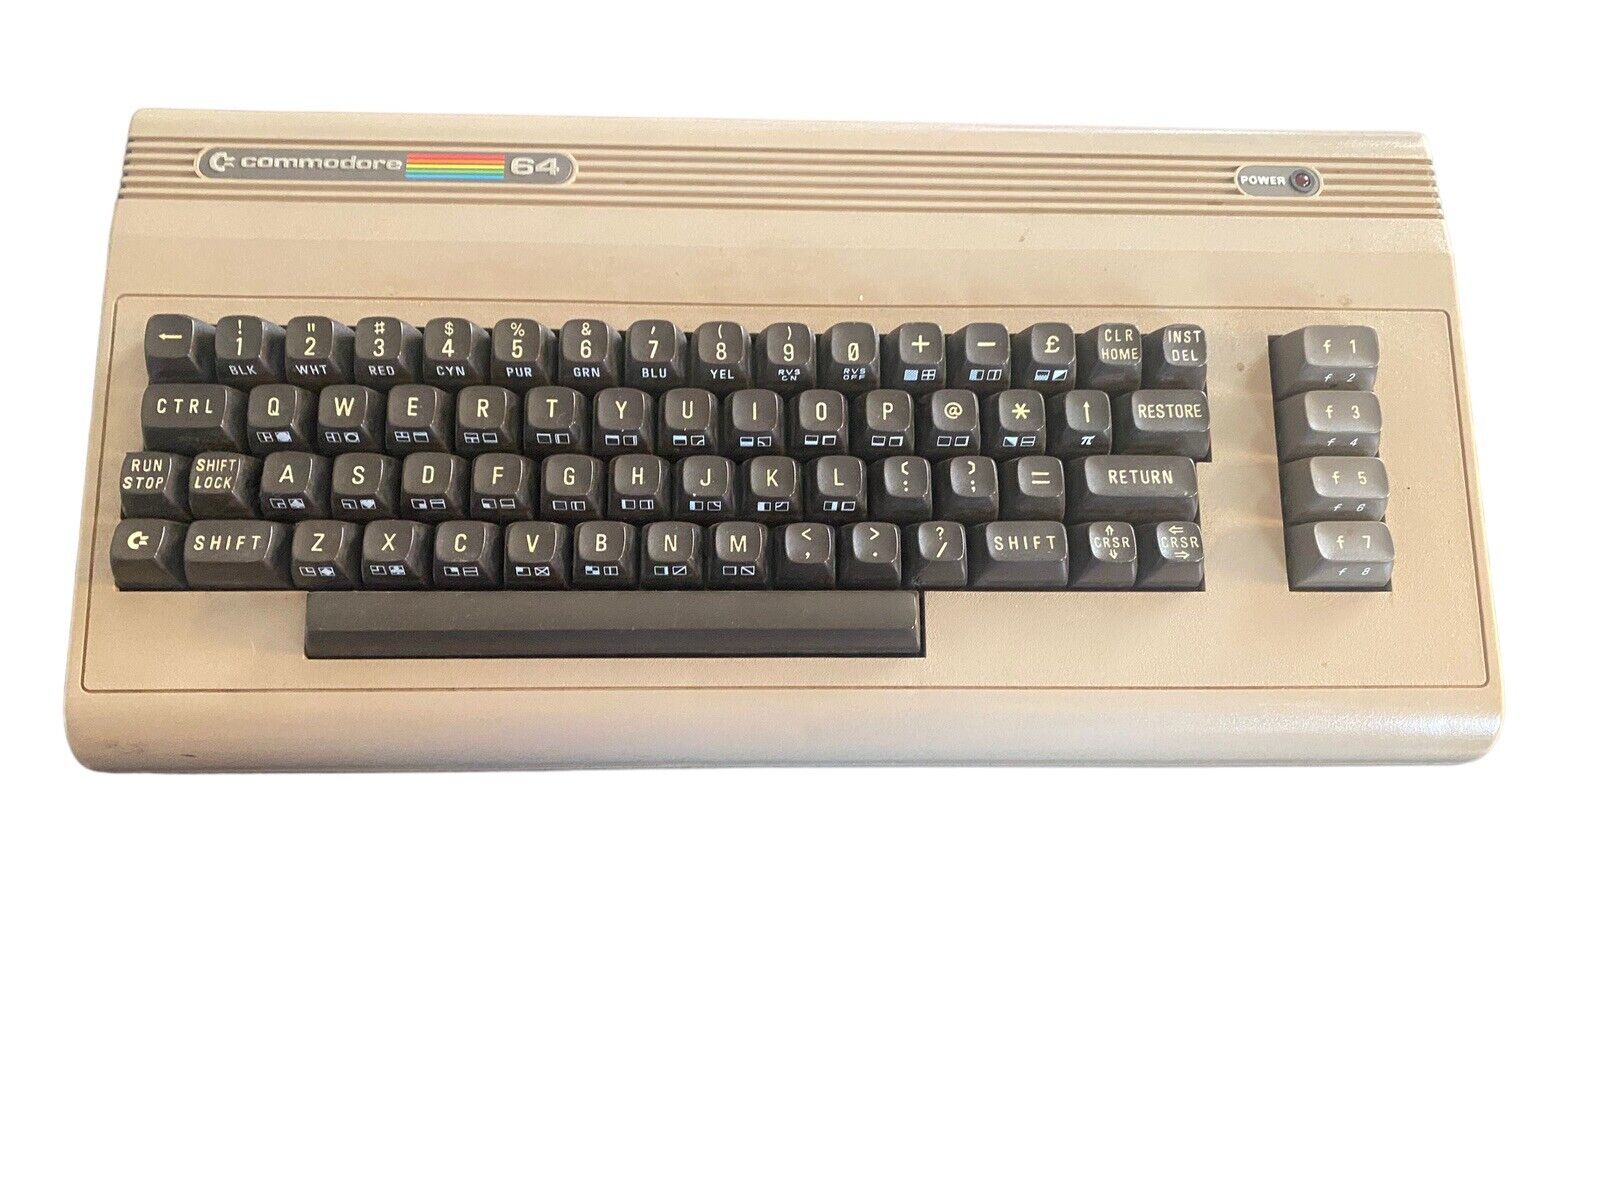 Vintage Commodore 64 Personal Computer Keyboard for Gaming Untested Read Desc.